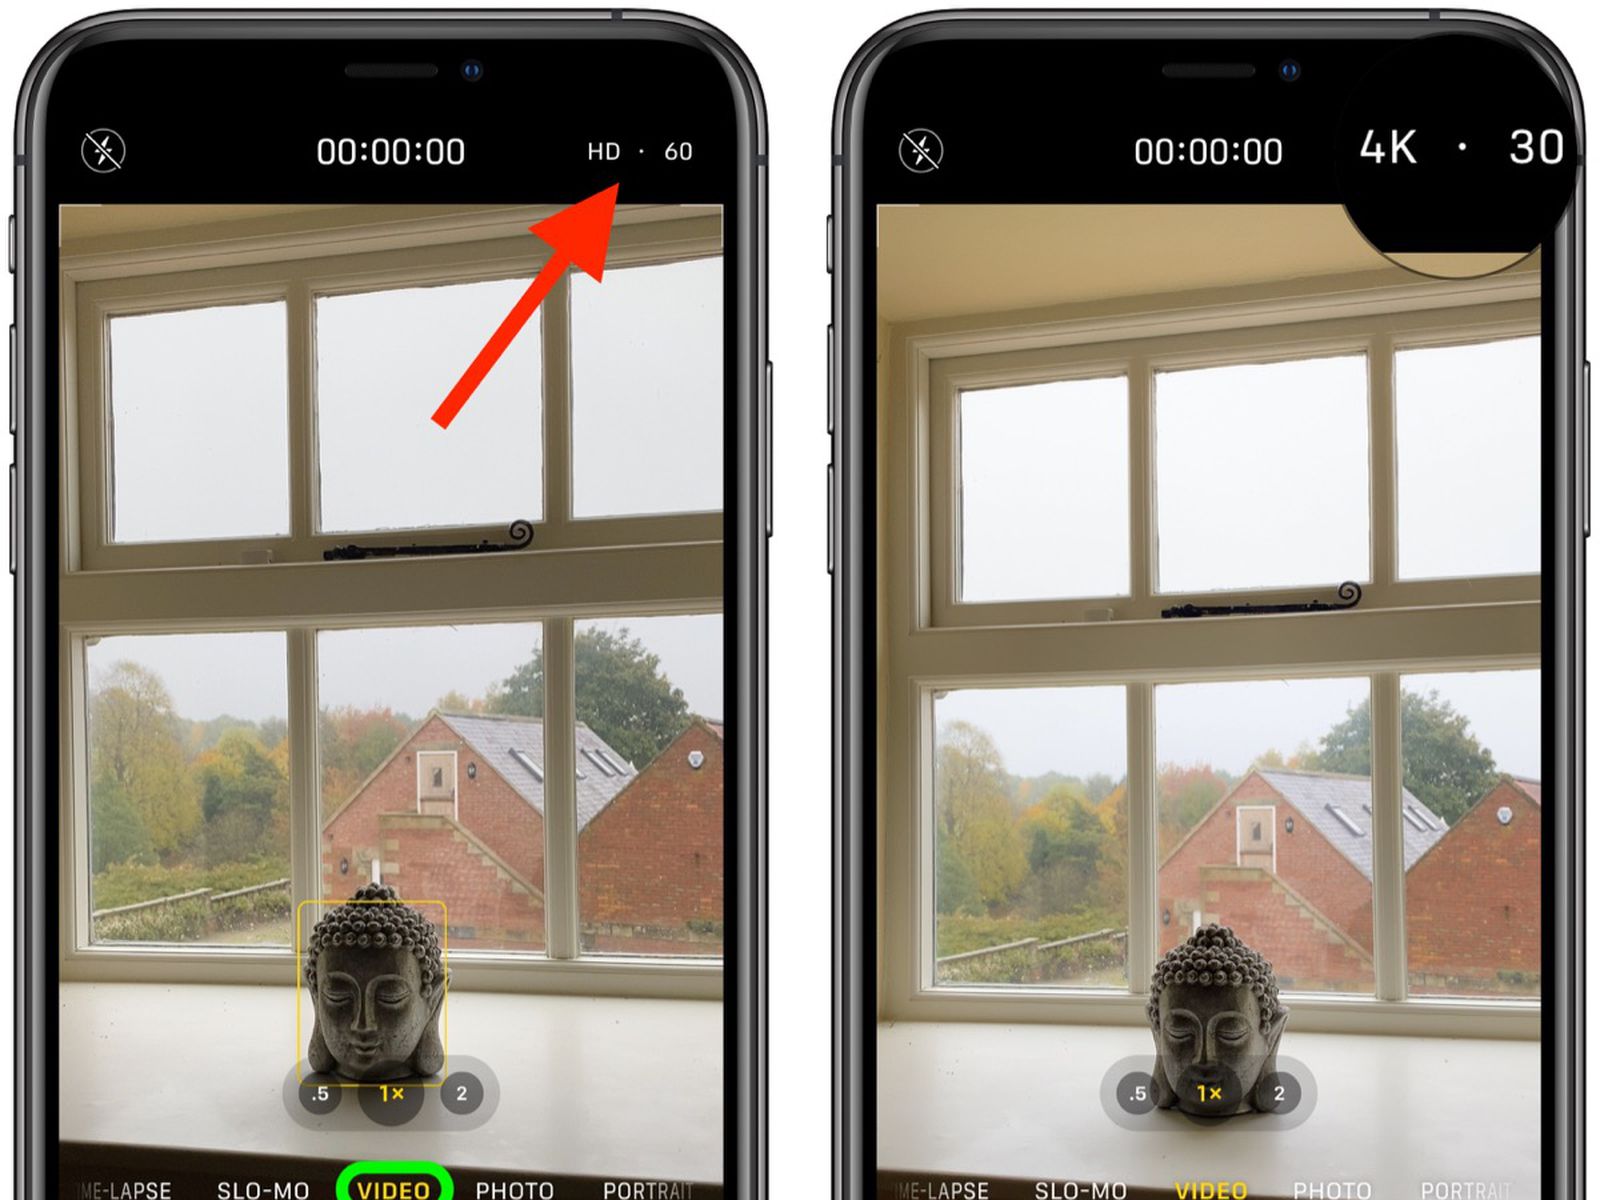 How To Send 4k Video From iPhone Without Losing Quality 1